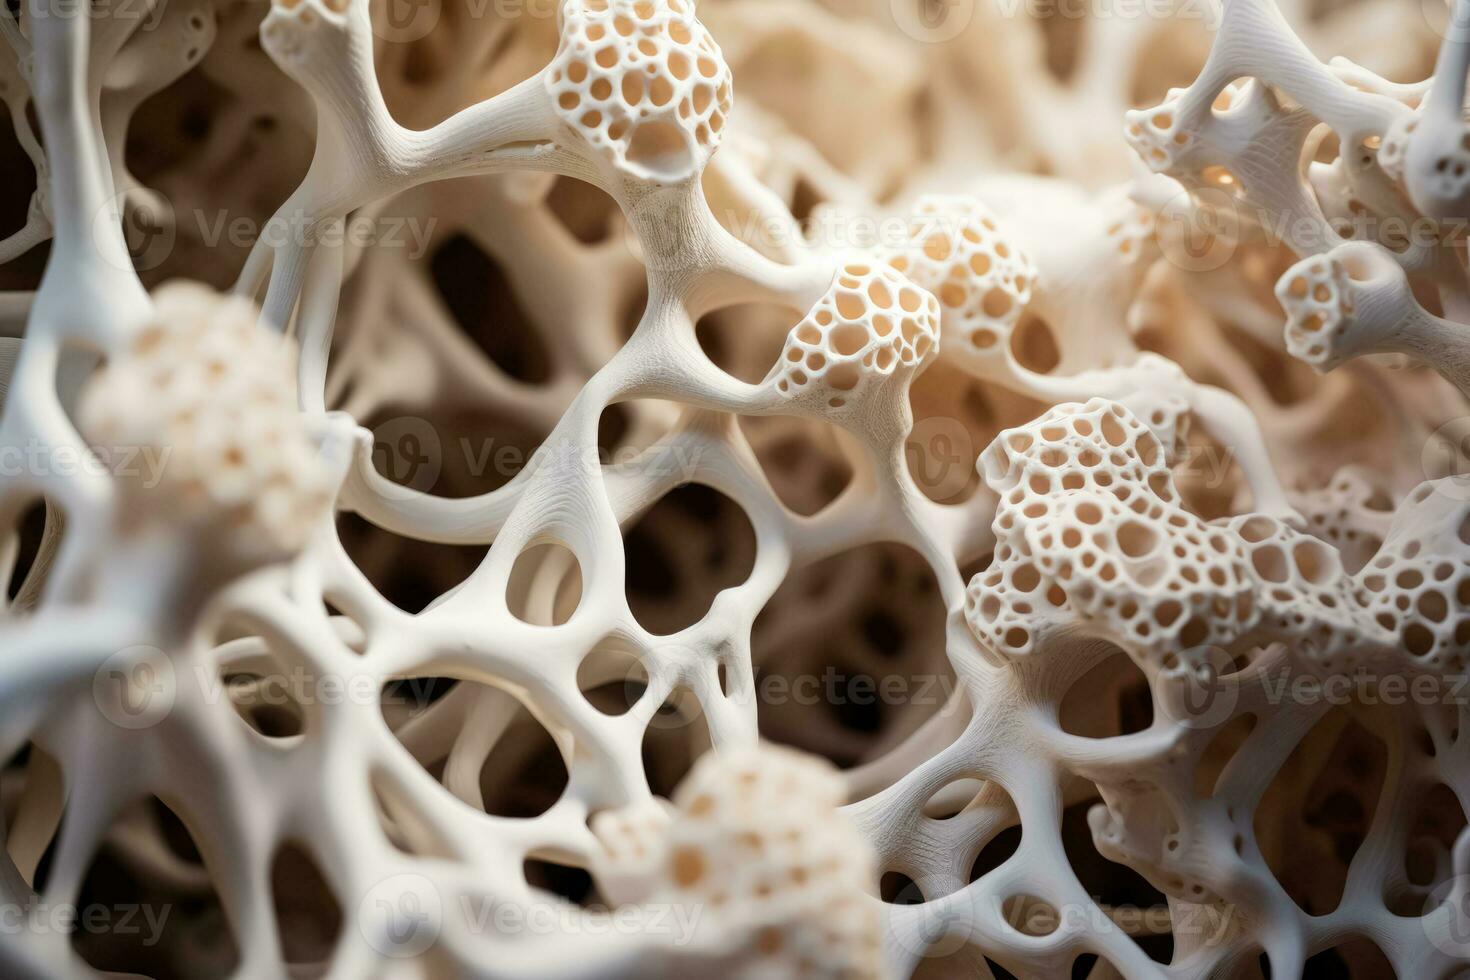 A close up of a 3D printed coral structure showcasing the precise mimicry of natural coral formations through modern technology photo